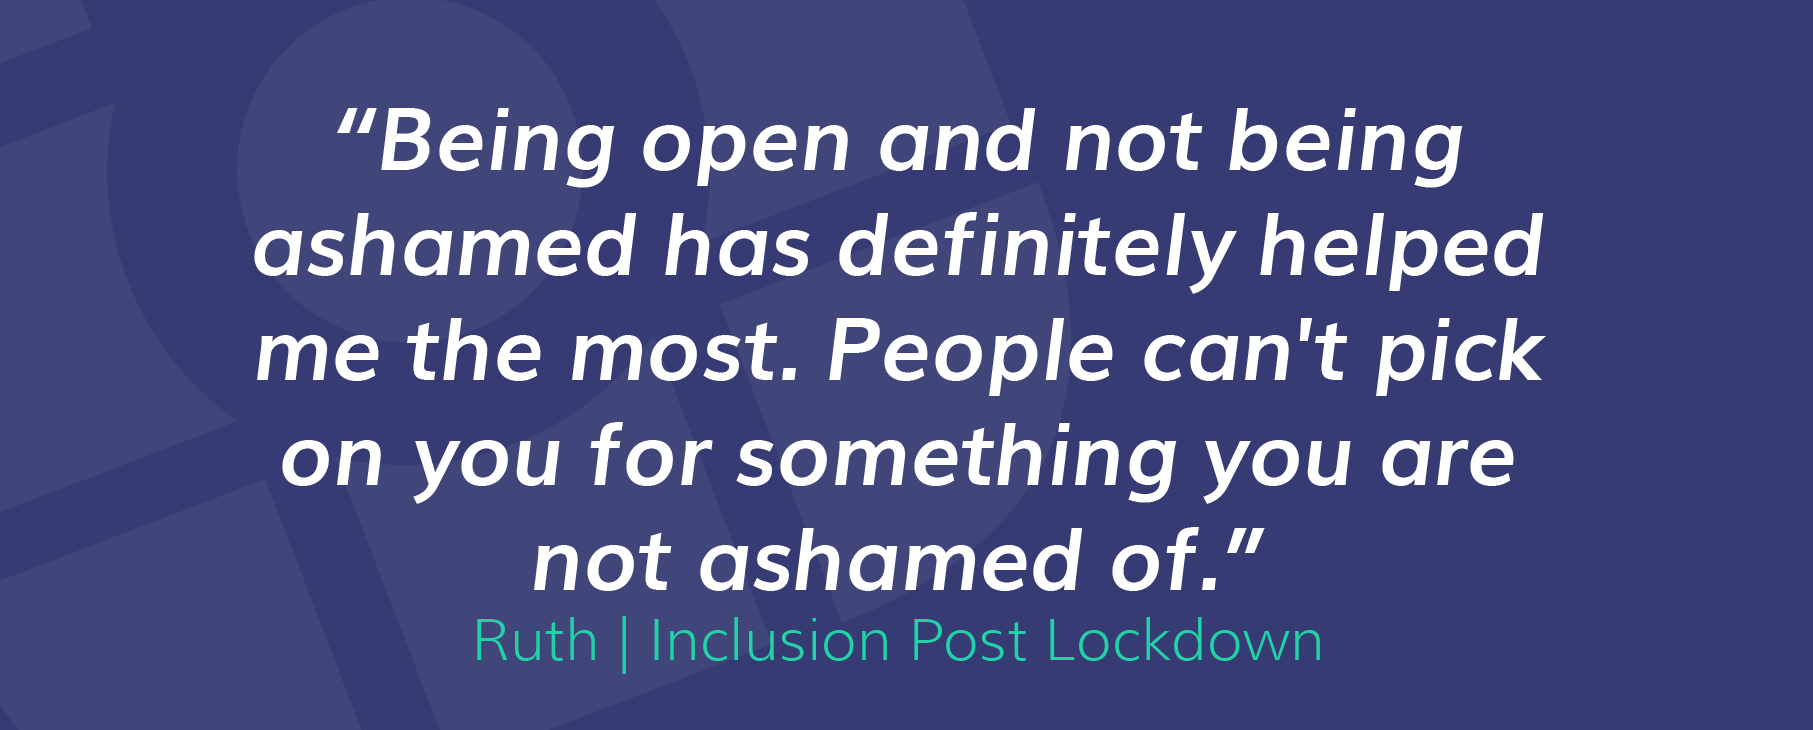 Inclusion post lockdown interview 01